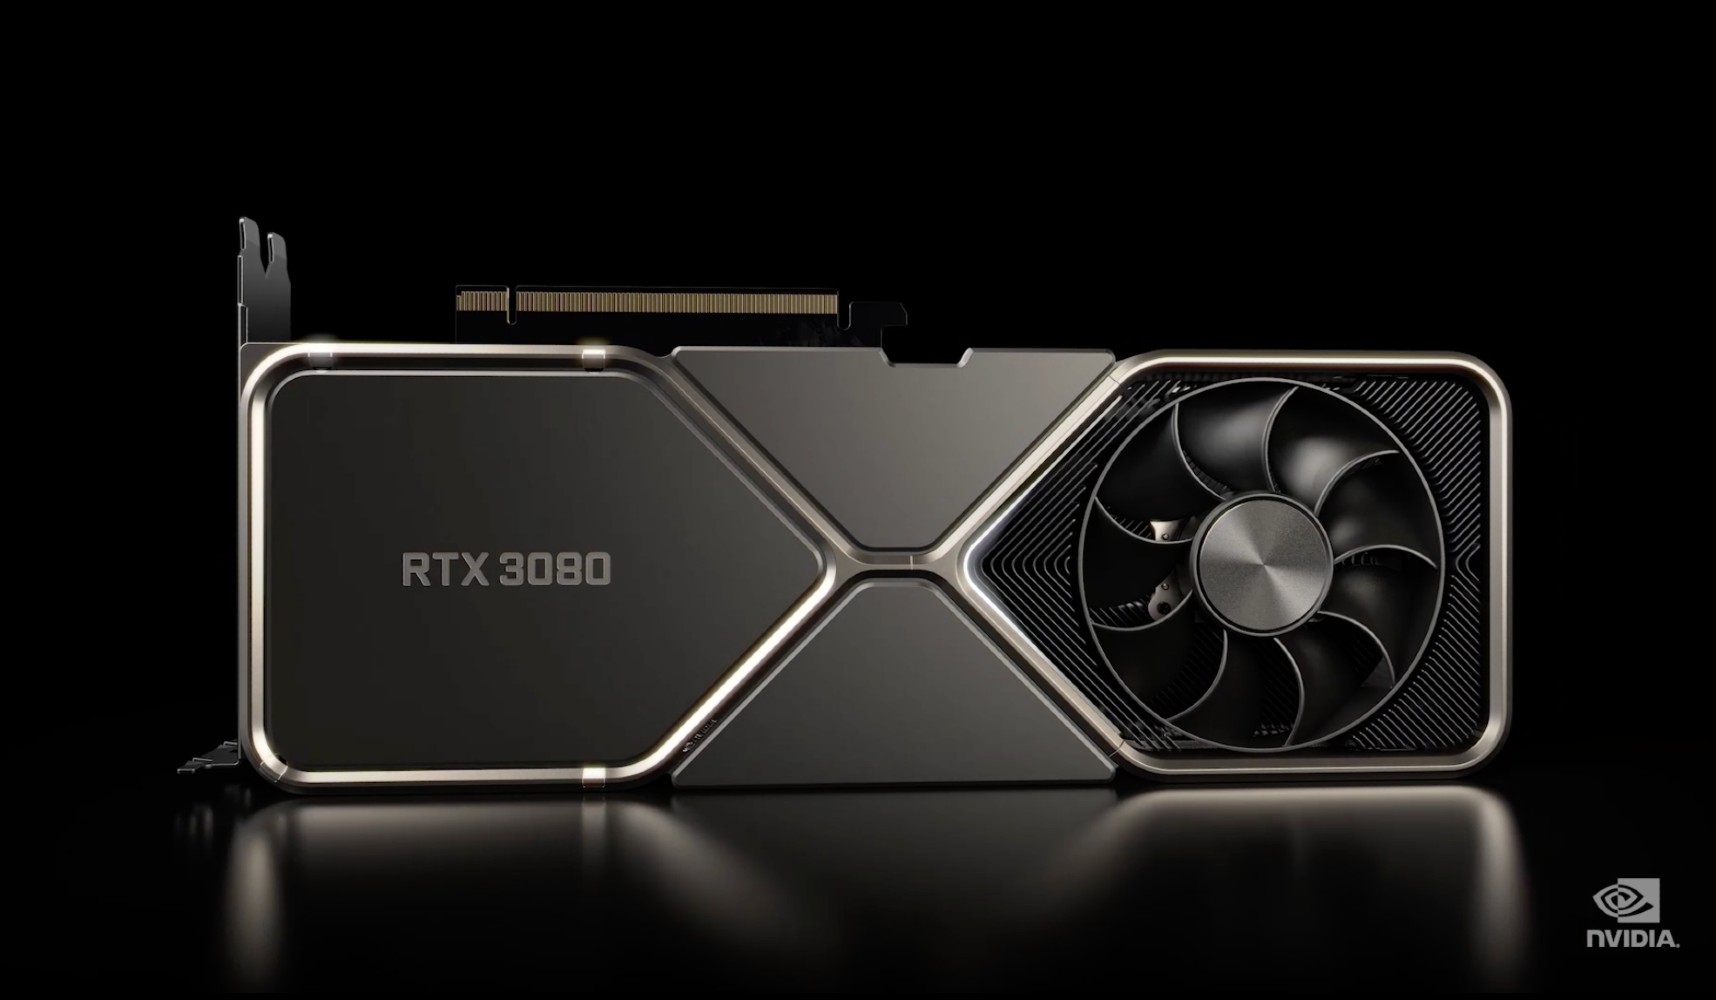 Nvidia RTX 3080: Price, Release Date, Specs, and More | Digital Trends